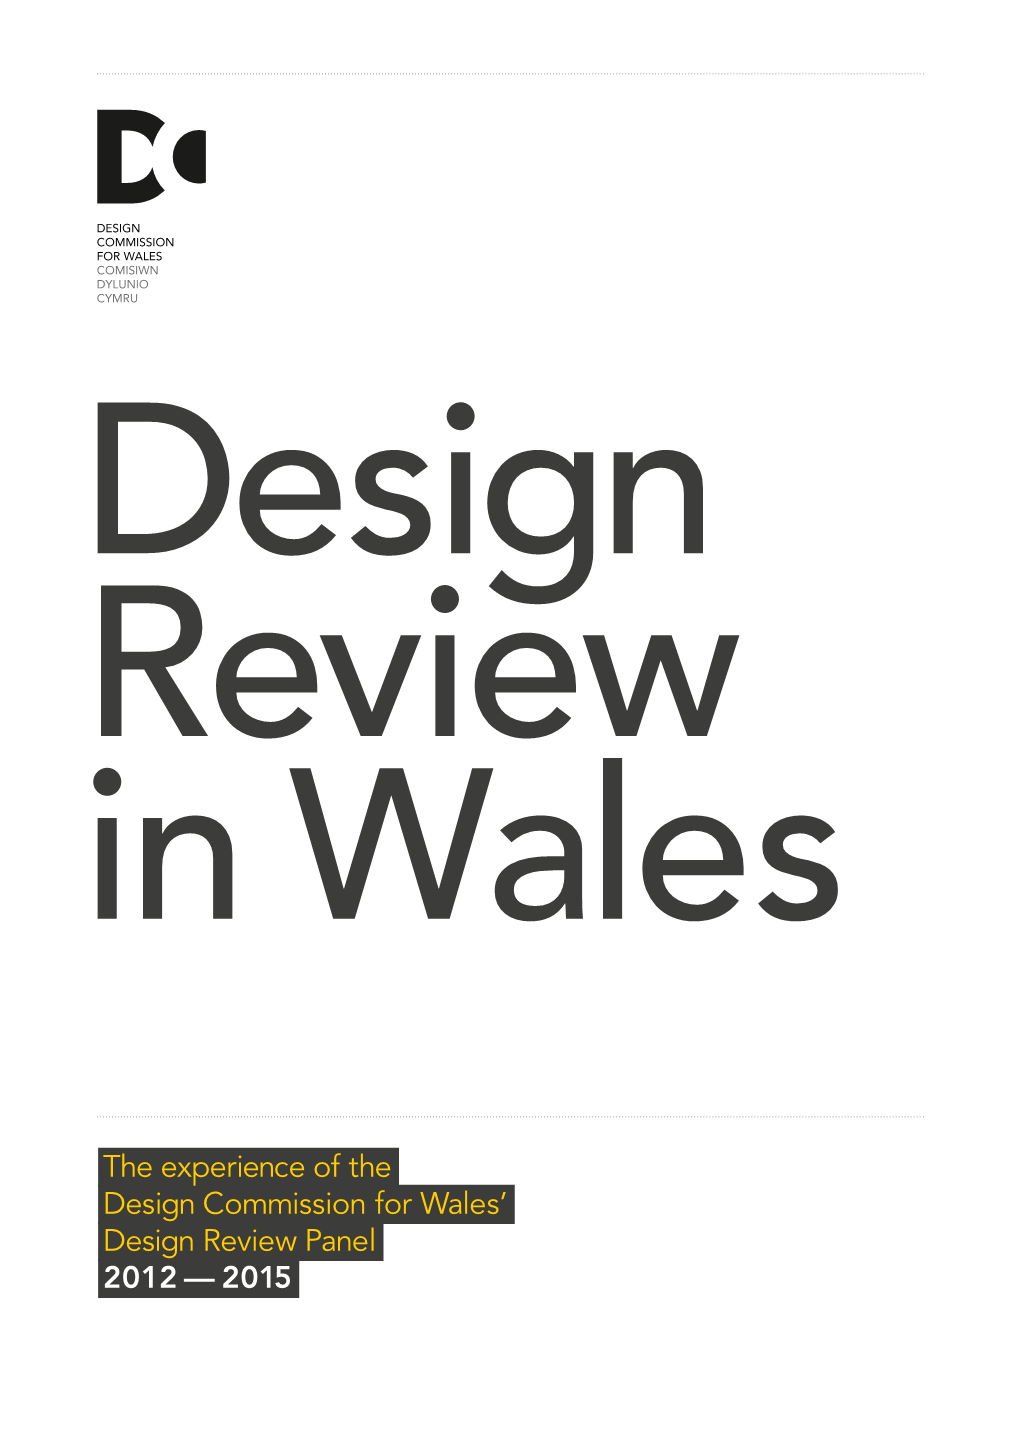 The Experience of the Design Commission for Wales' Design